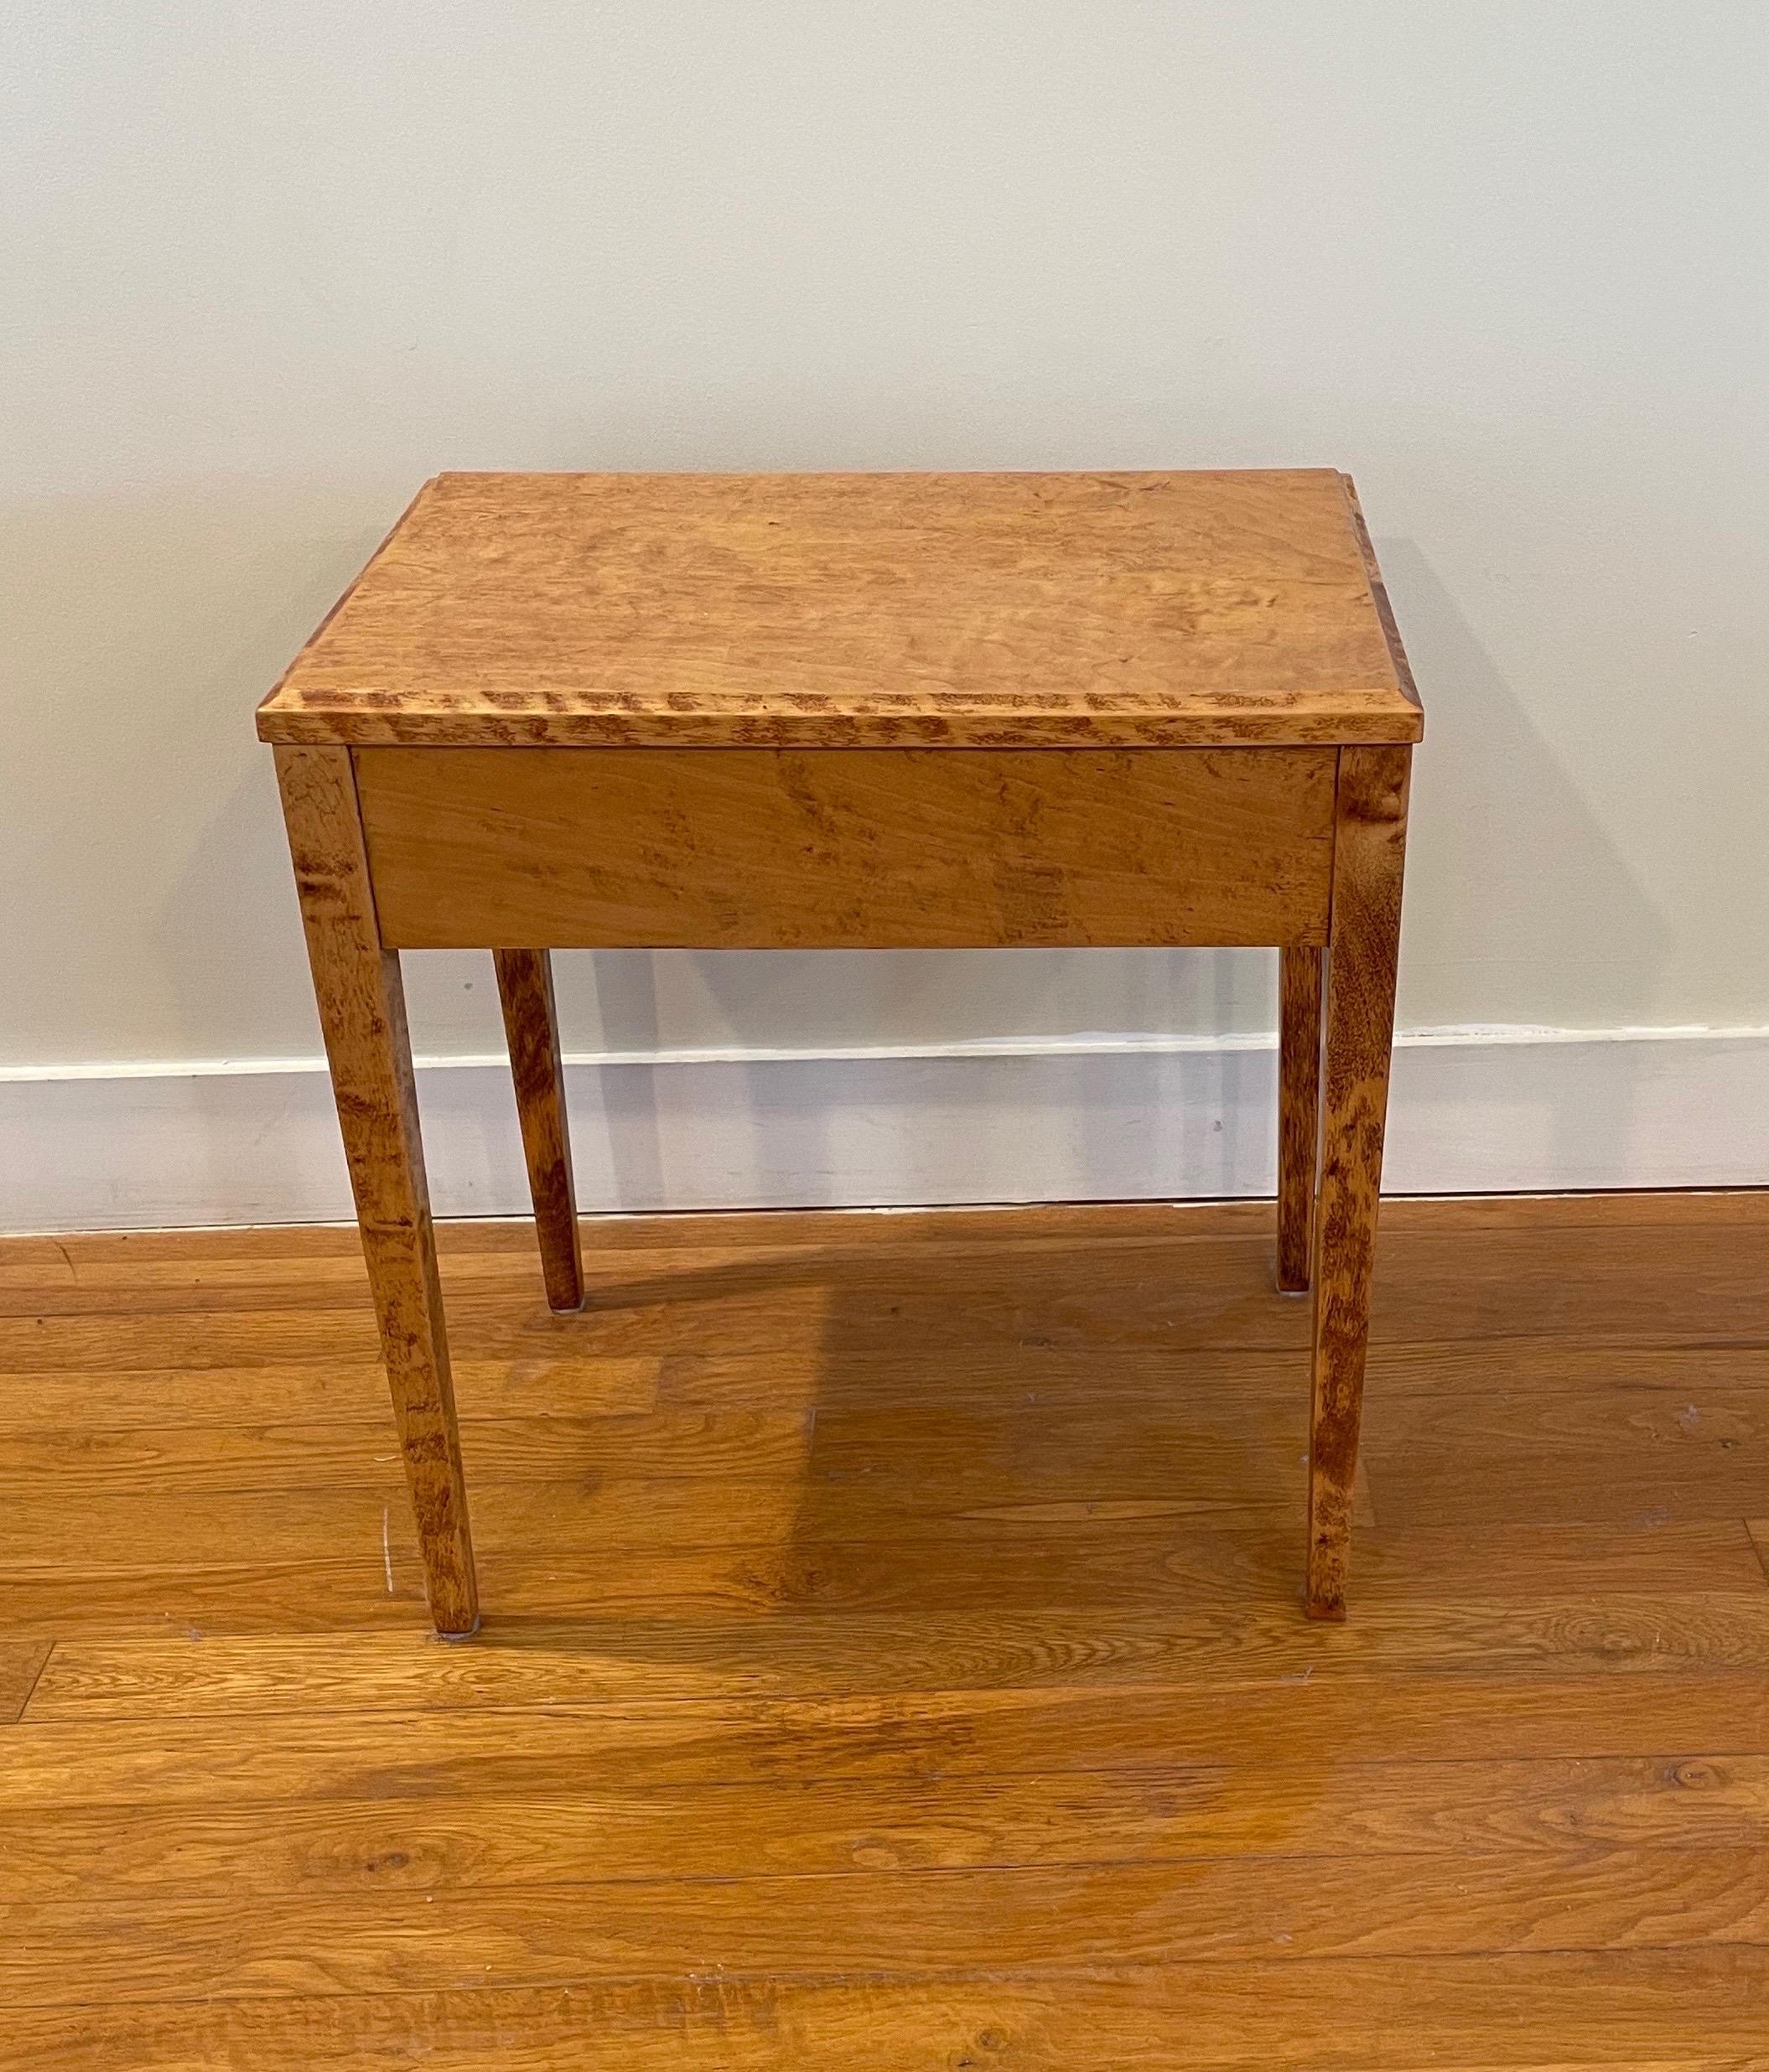 A petite table crafted of Nordic birch with an ebonized, diamond shaped inlay in the apron. Of the Svensk-Jugend Still period, the table dates to roughly 1910. The original finish has been restored to a soothing golden glow.